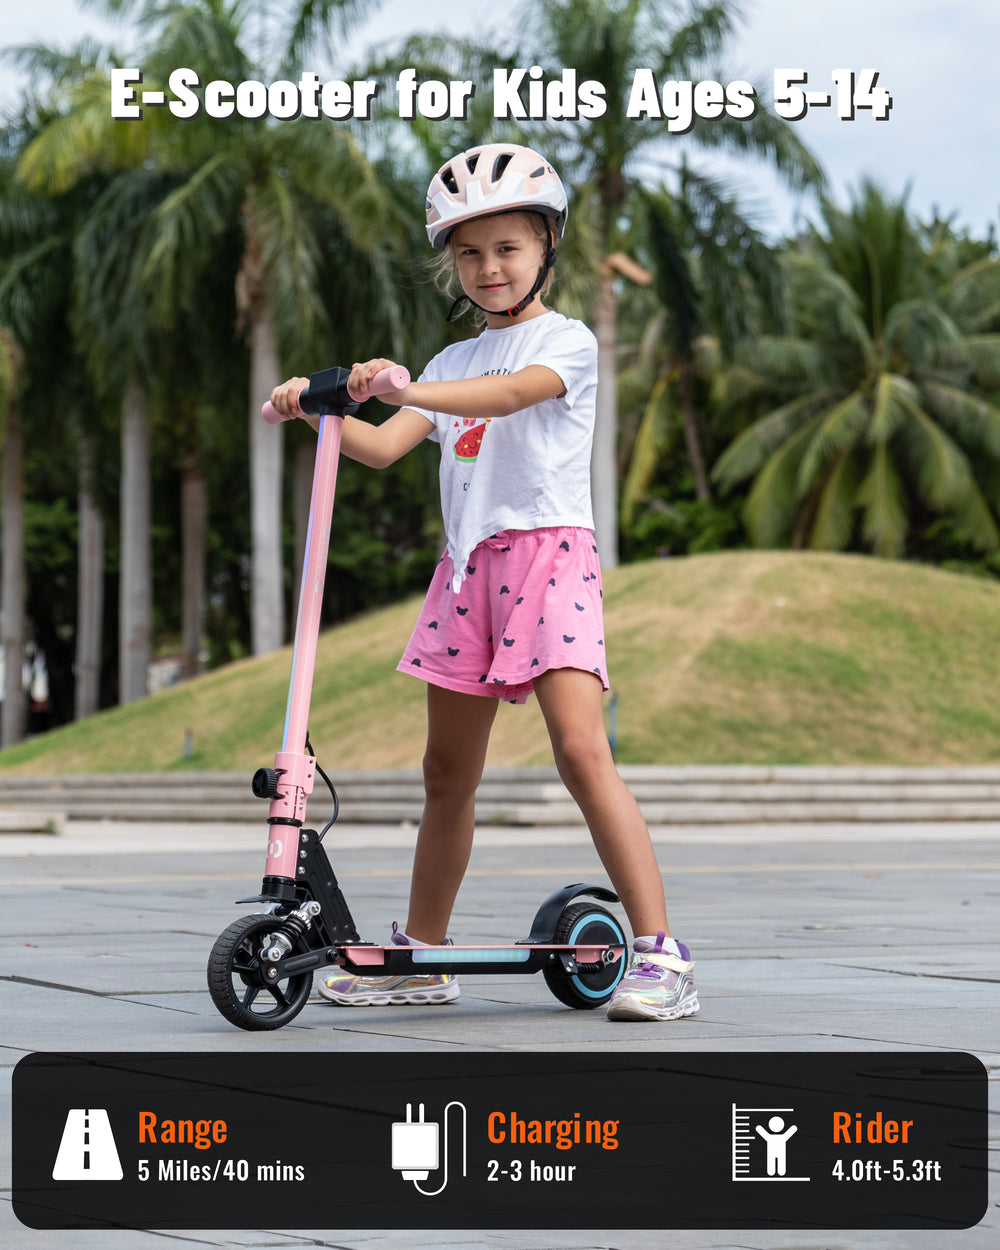 New Arrival S5 Colorful Headlight Electric Scooter for Kids